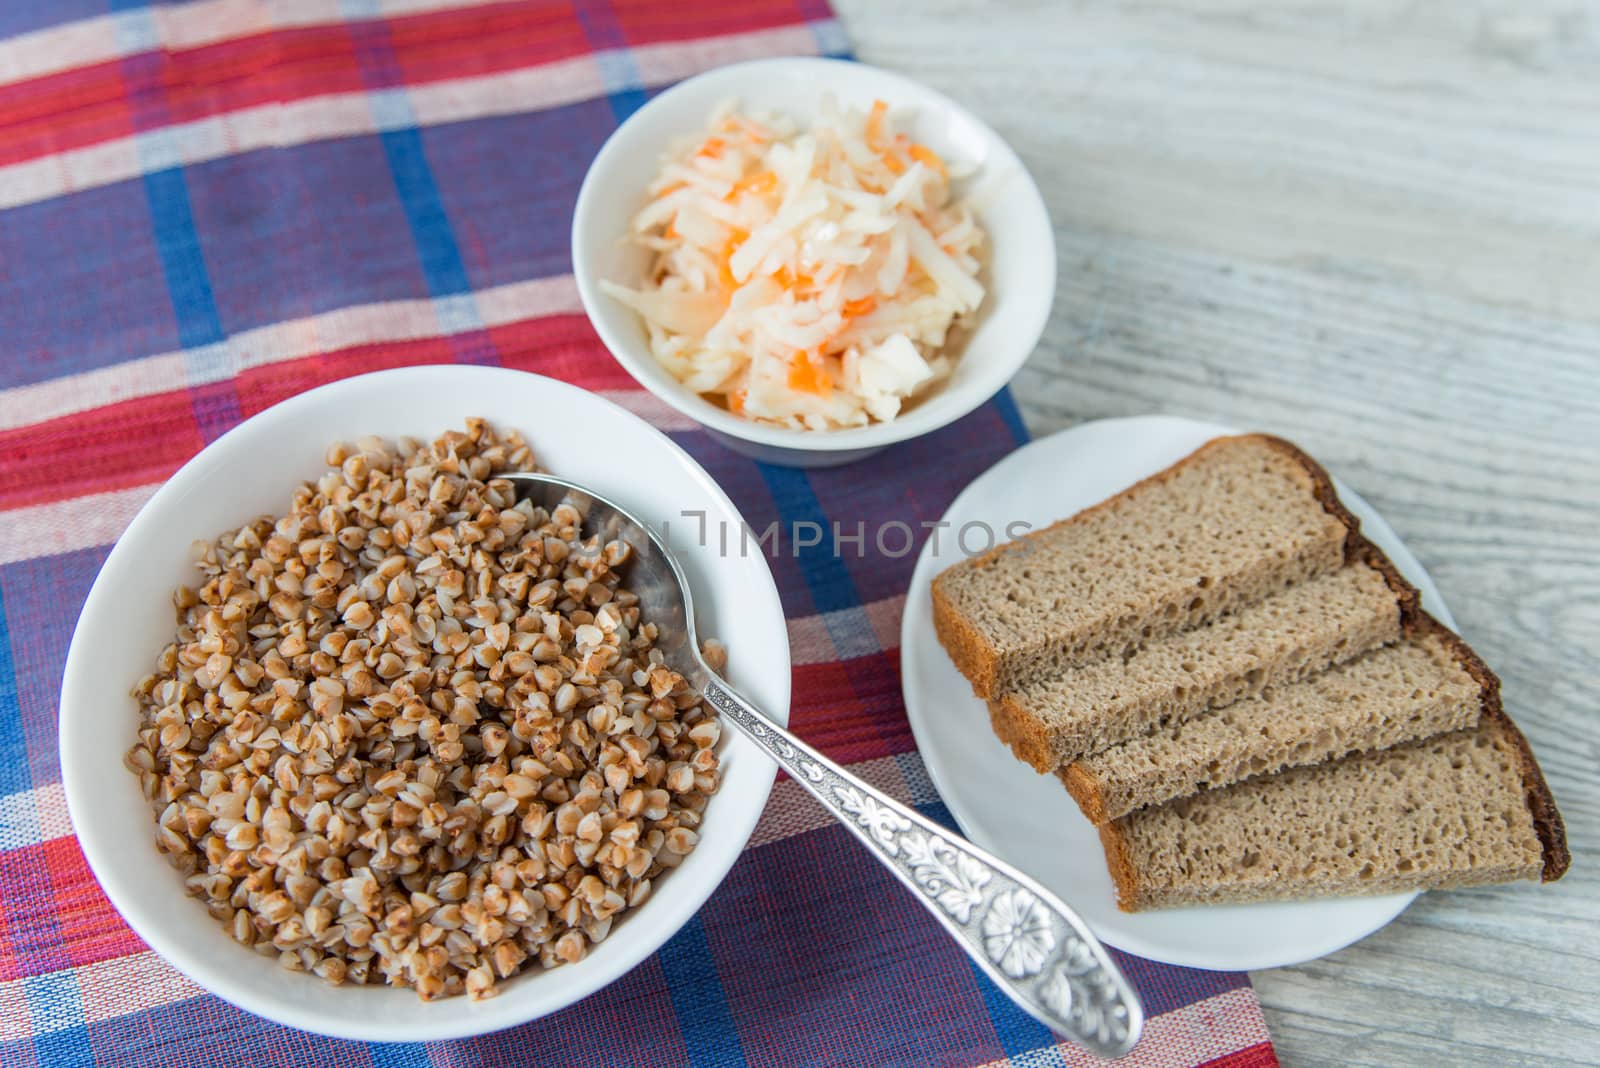 Dinner with the buckwheat cereals and sauerkraut